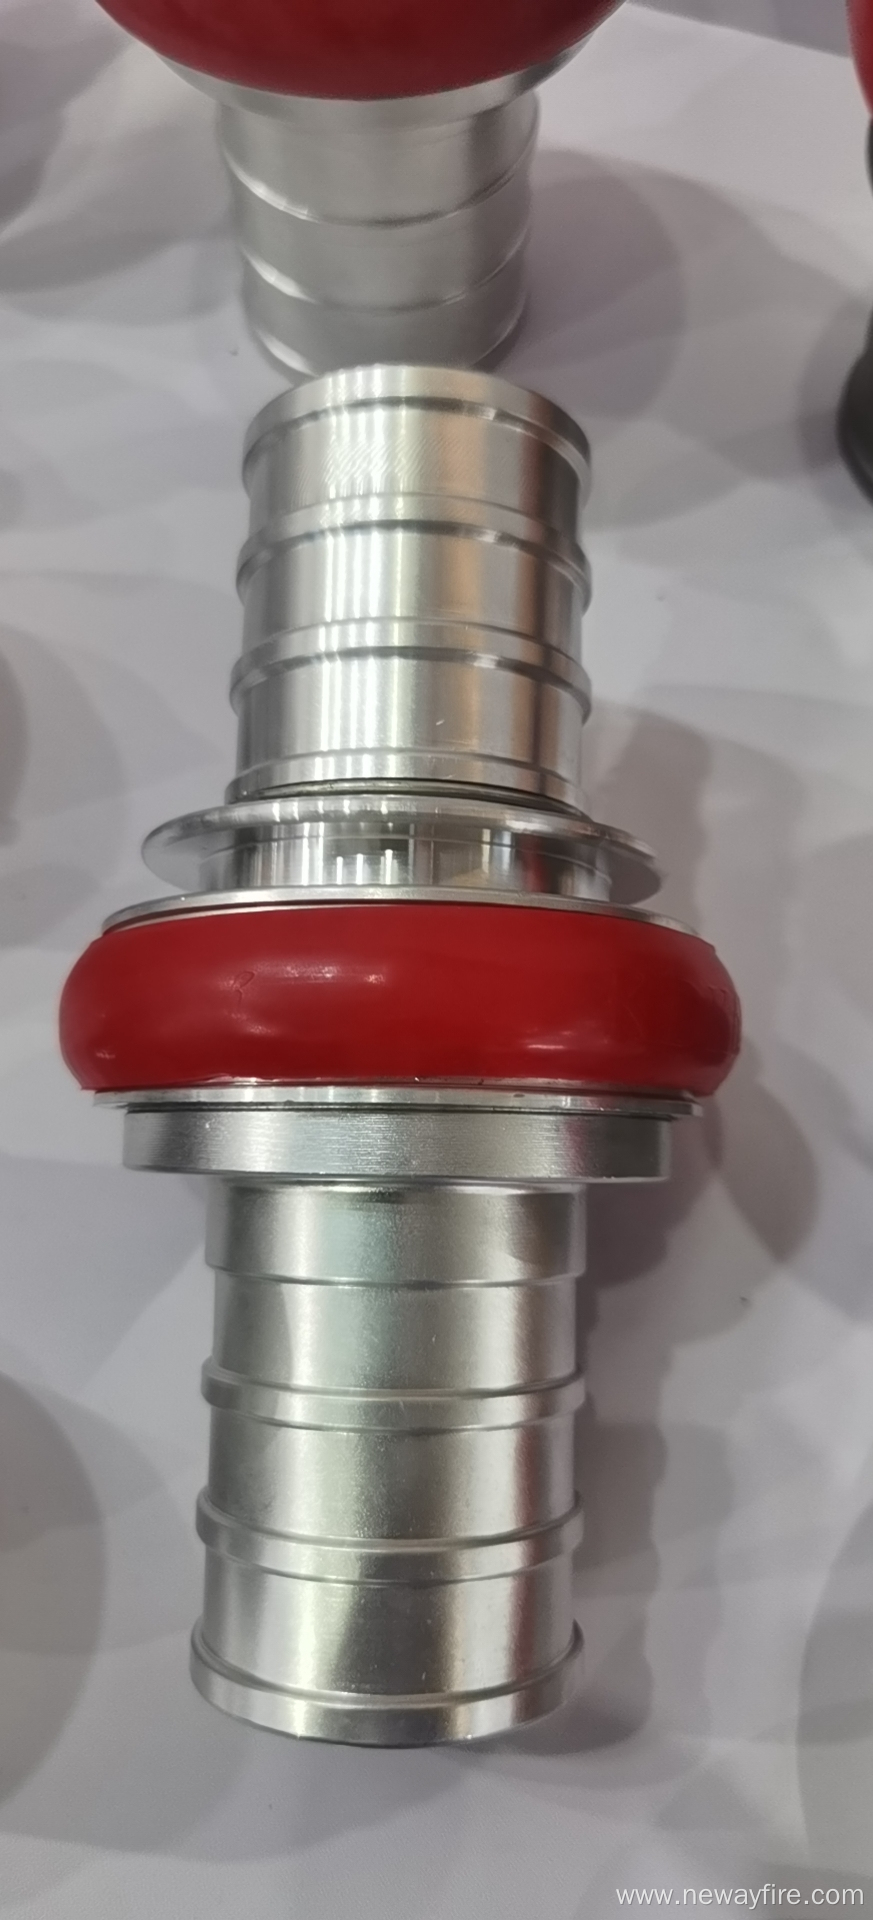 64mm Fire Hose Delivery Coupling